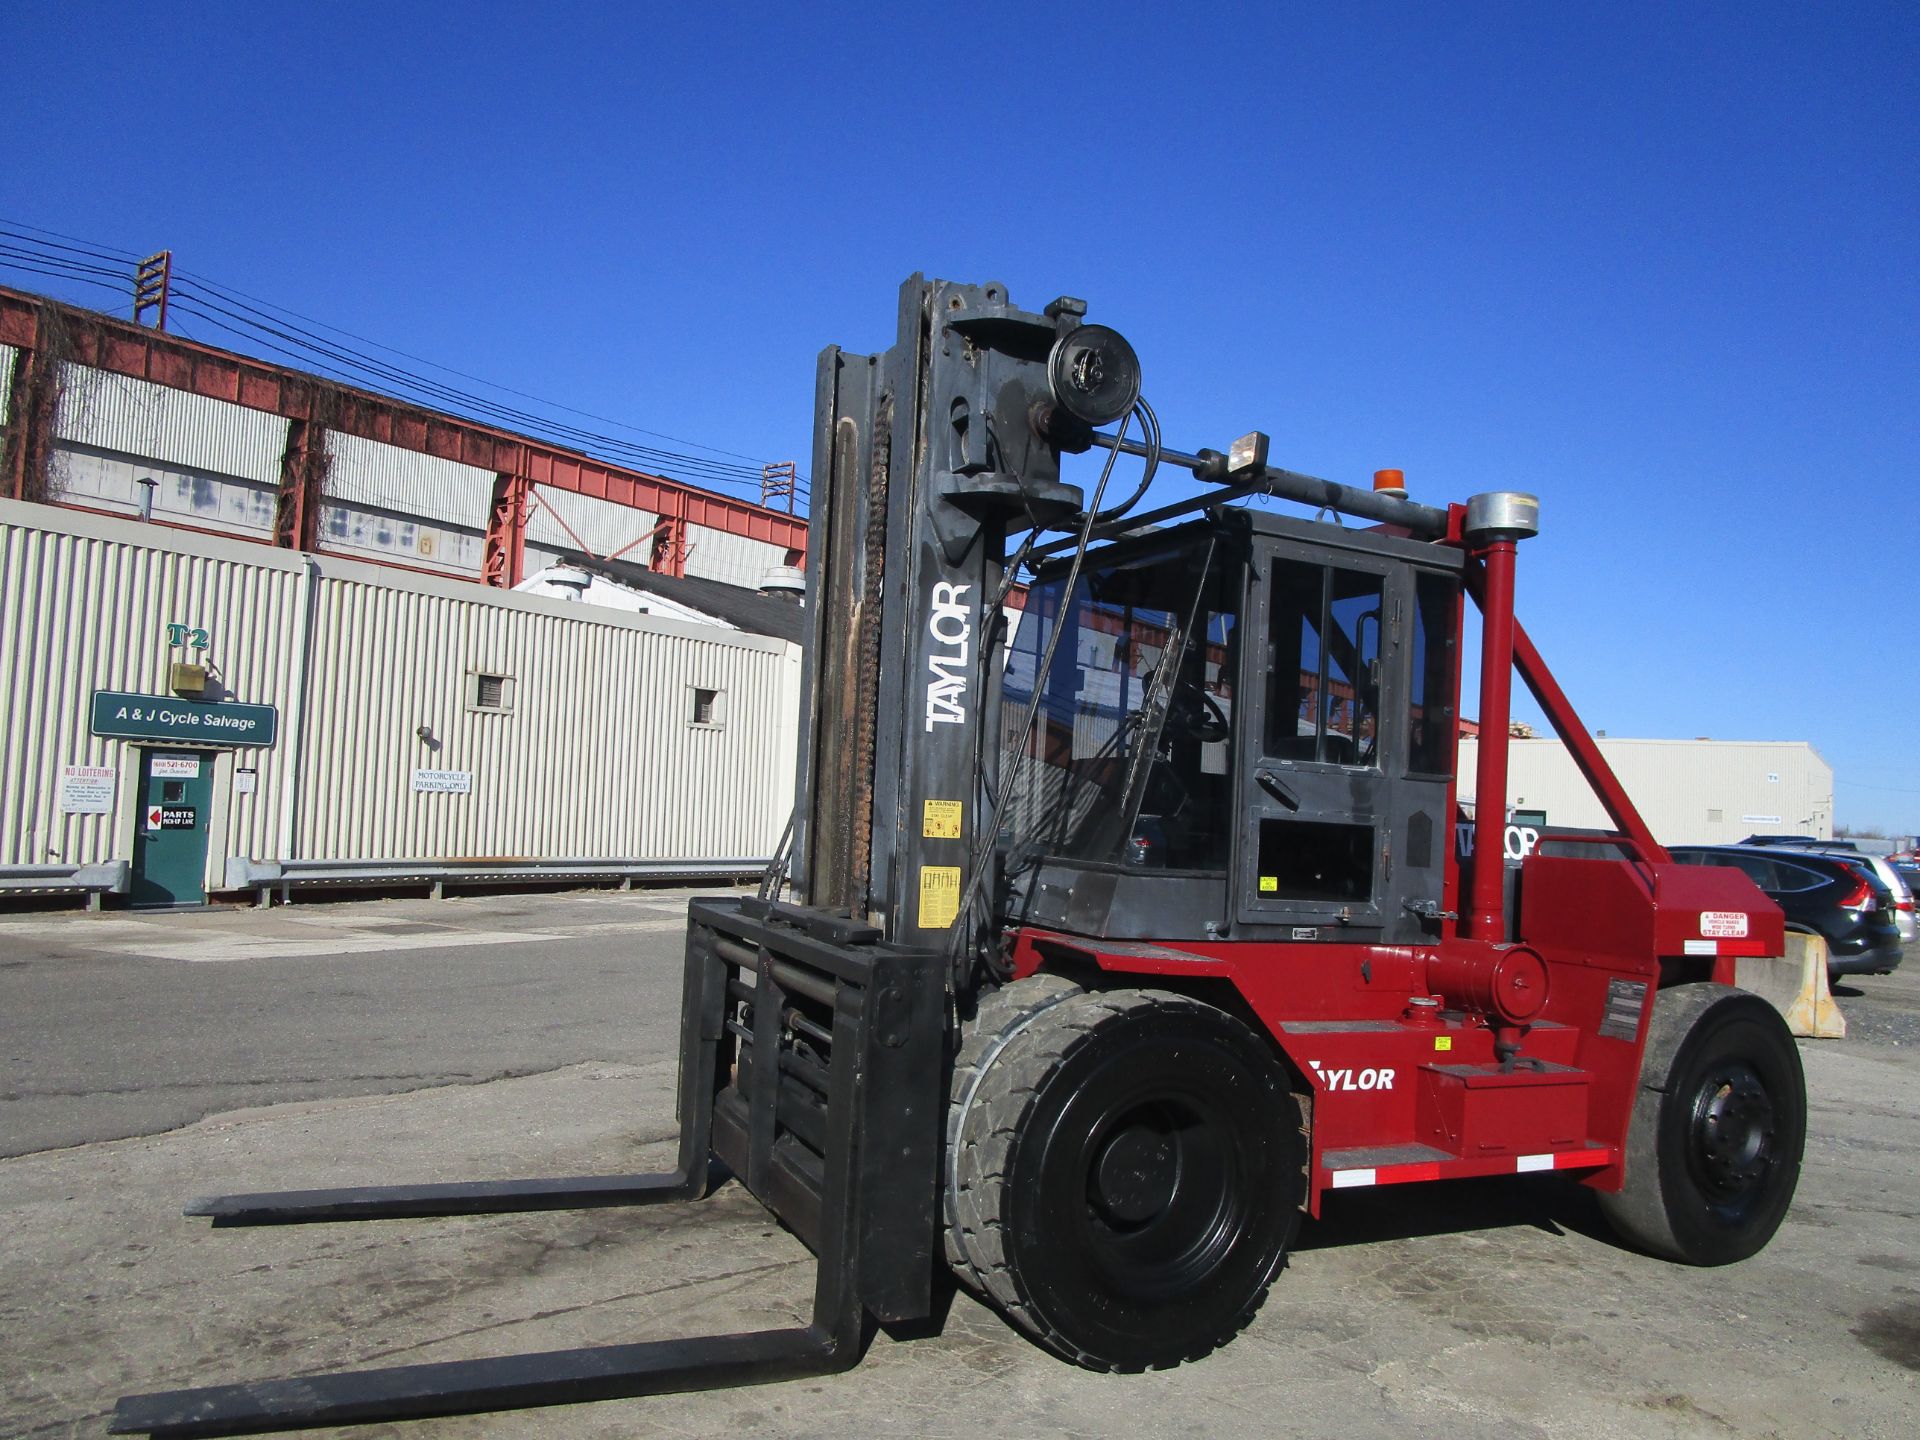 Taylor THD-300S 30,000lb Forklift - Image 18 of 20